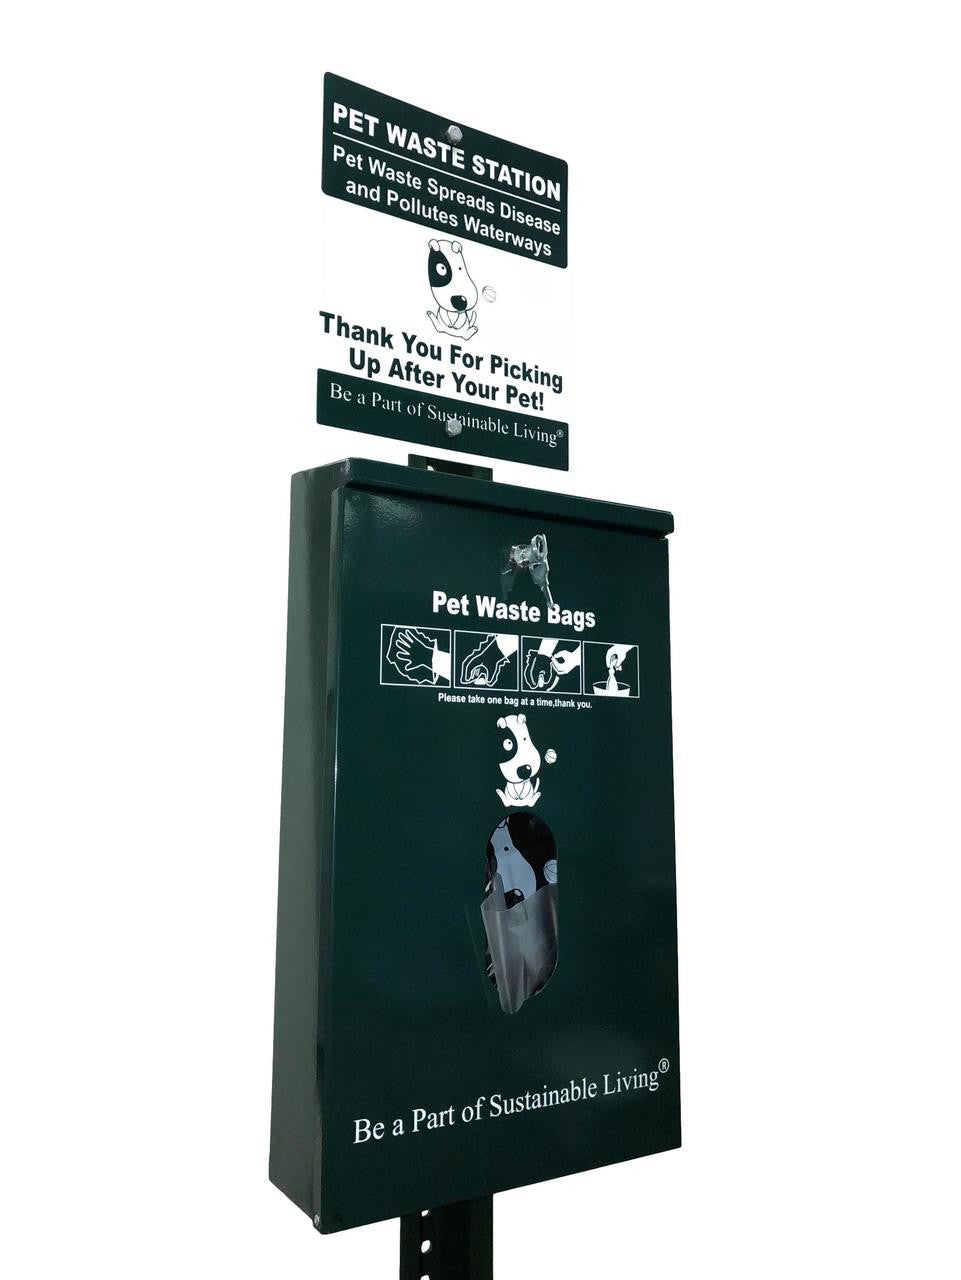 Dog waste station front and sign card